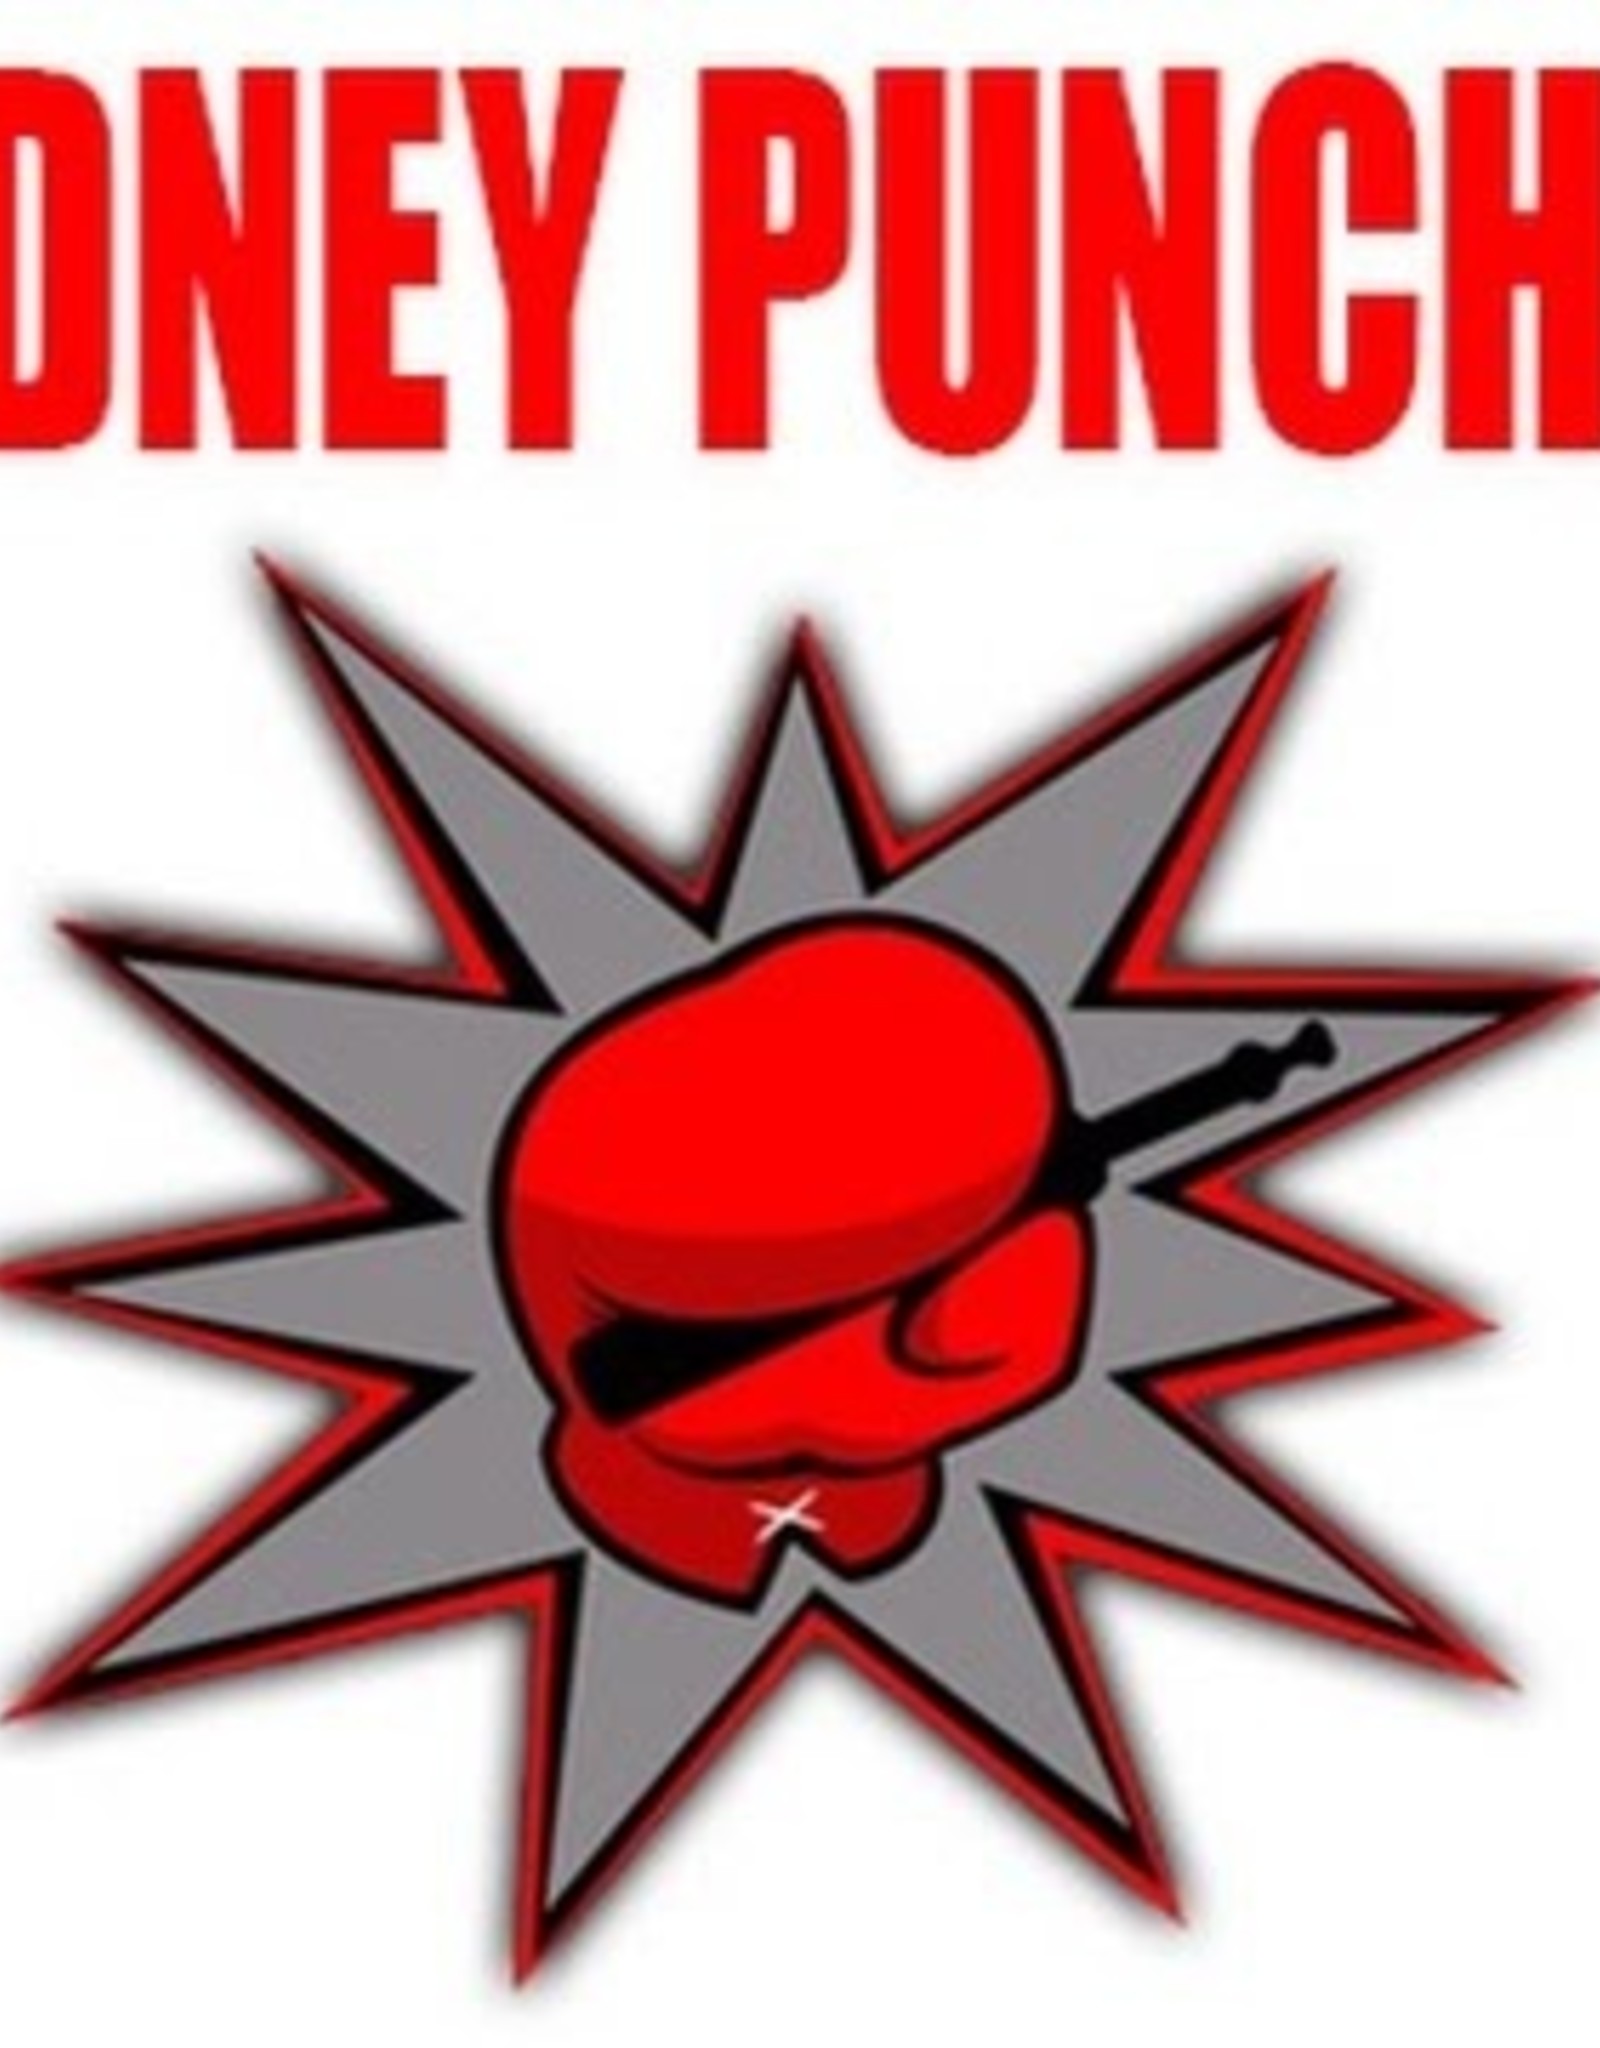 KIDNEY PUNCHER 24 A1 30FT ROLL